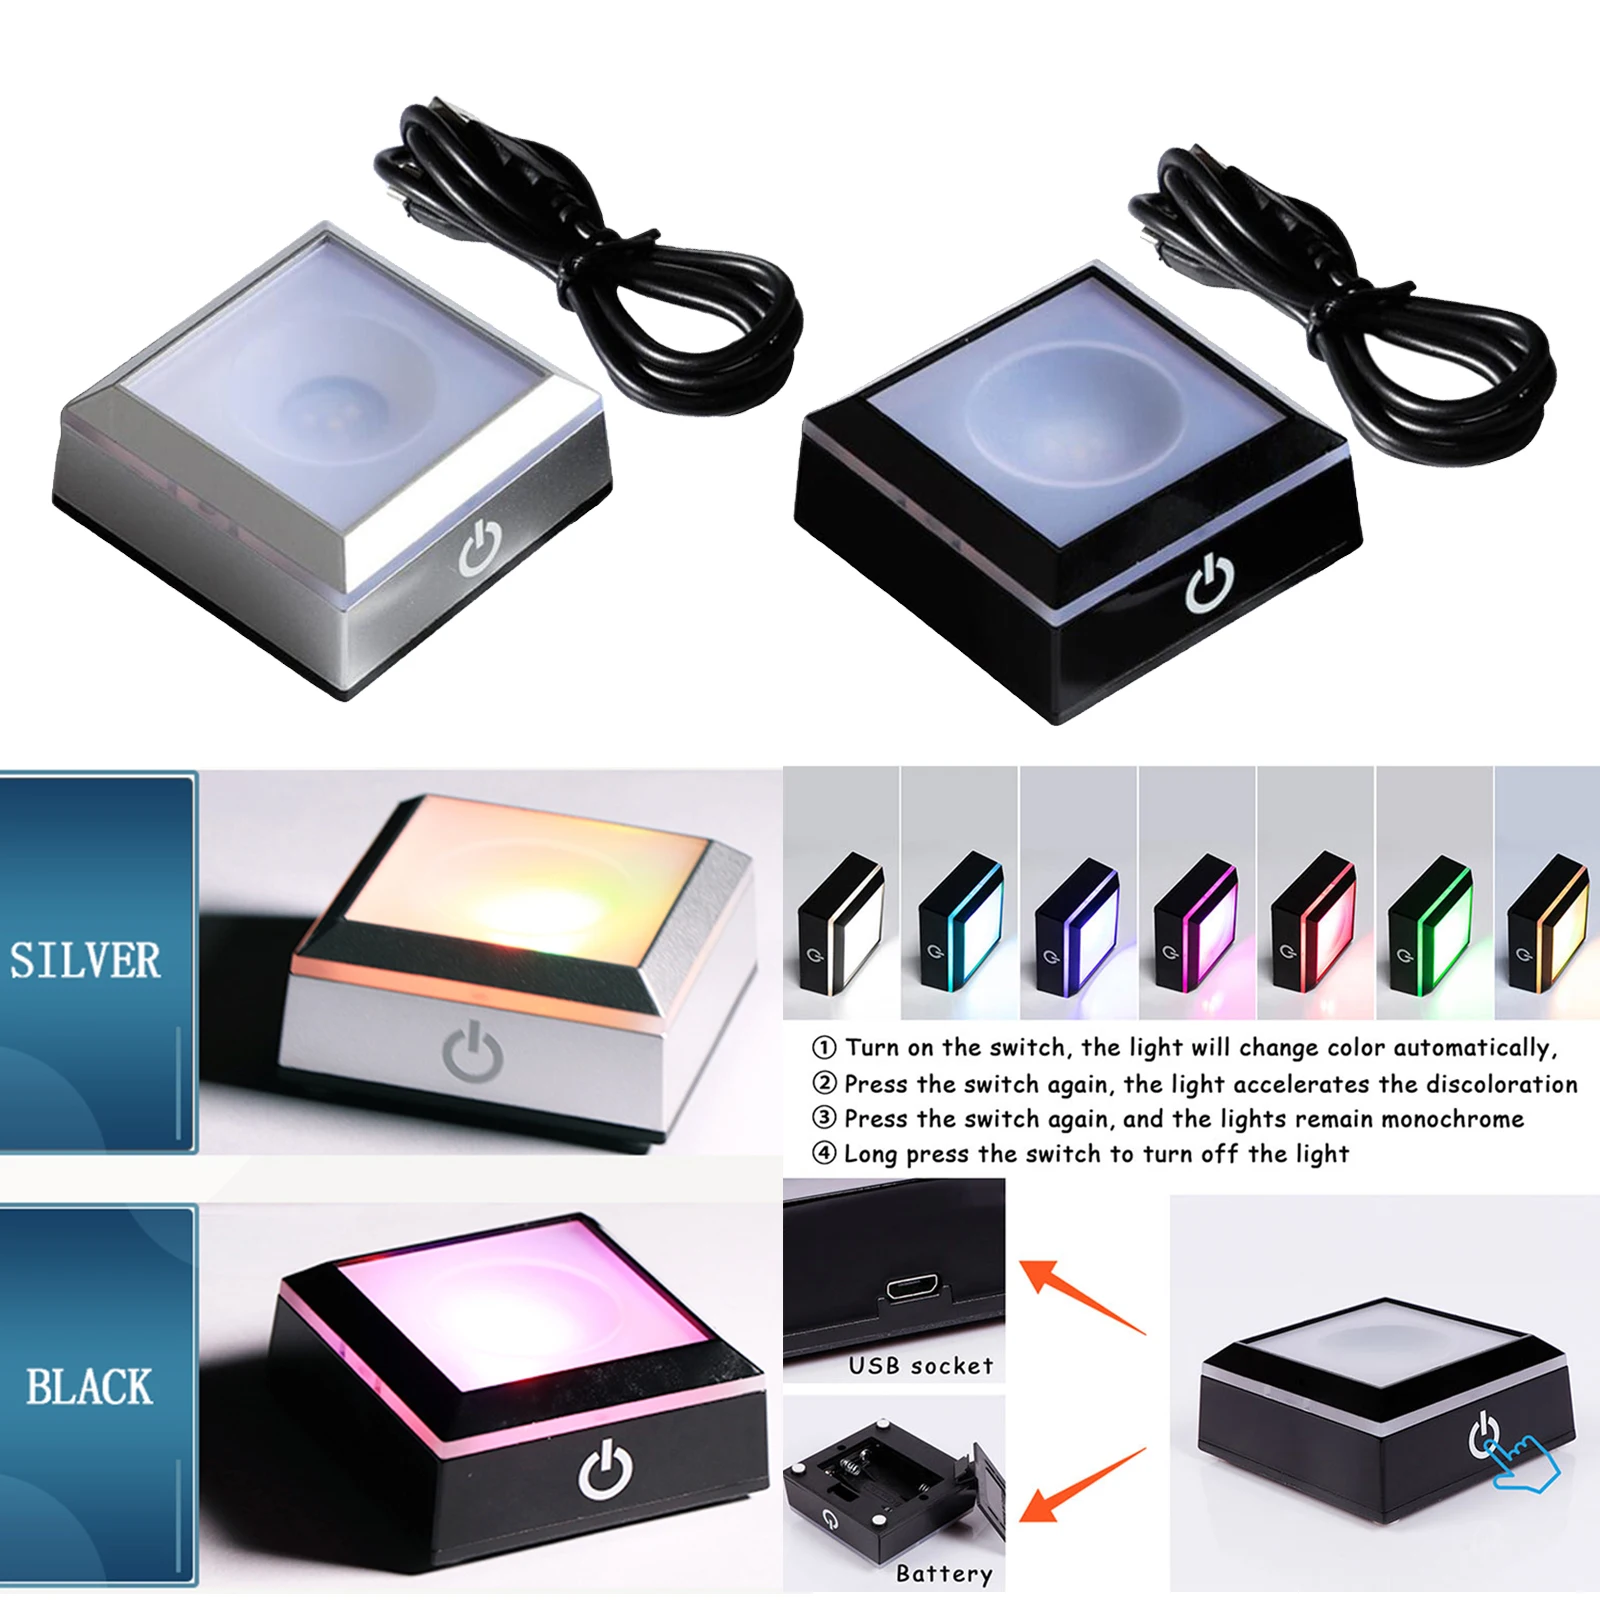 LED Light Base Lights Display Holder USB Powered Base Stand Glass Art Colorful Lighted Square Stand Display Plate